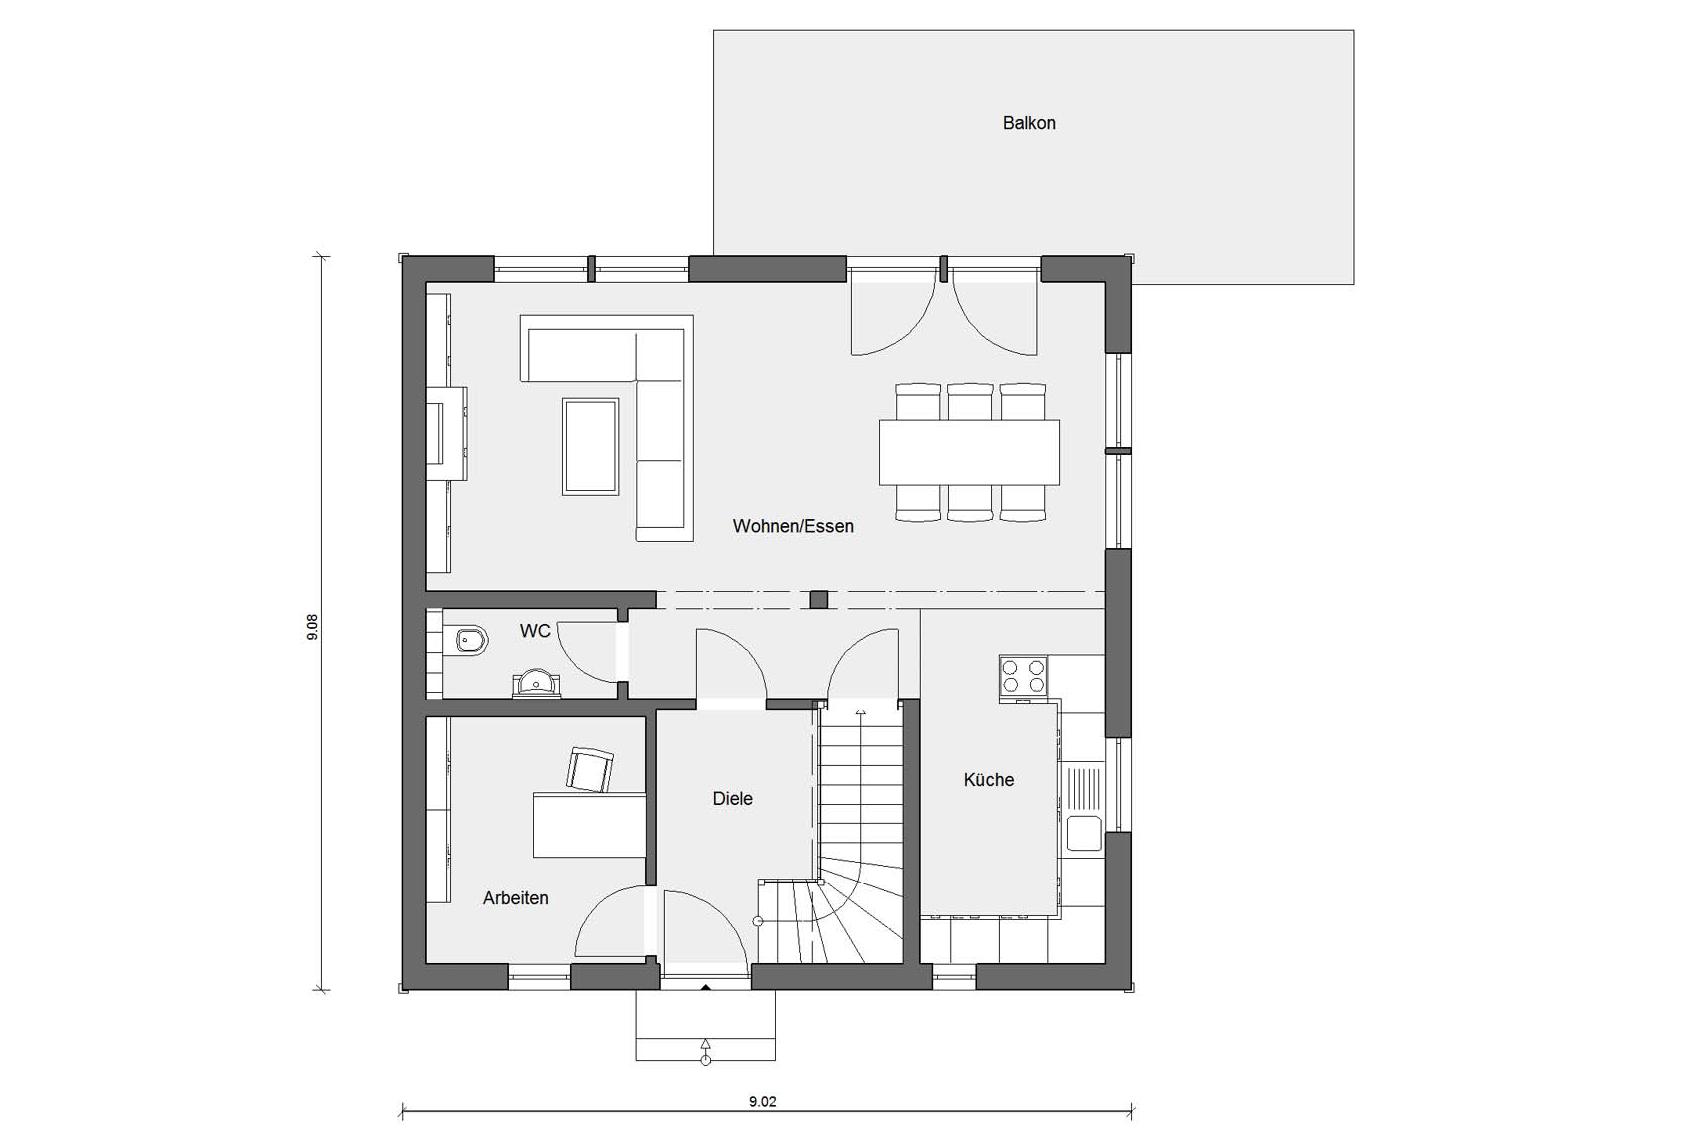 Floor plan ground floor D 15-134.1 Semi-detached house in the Swedish style